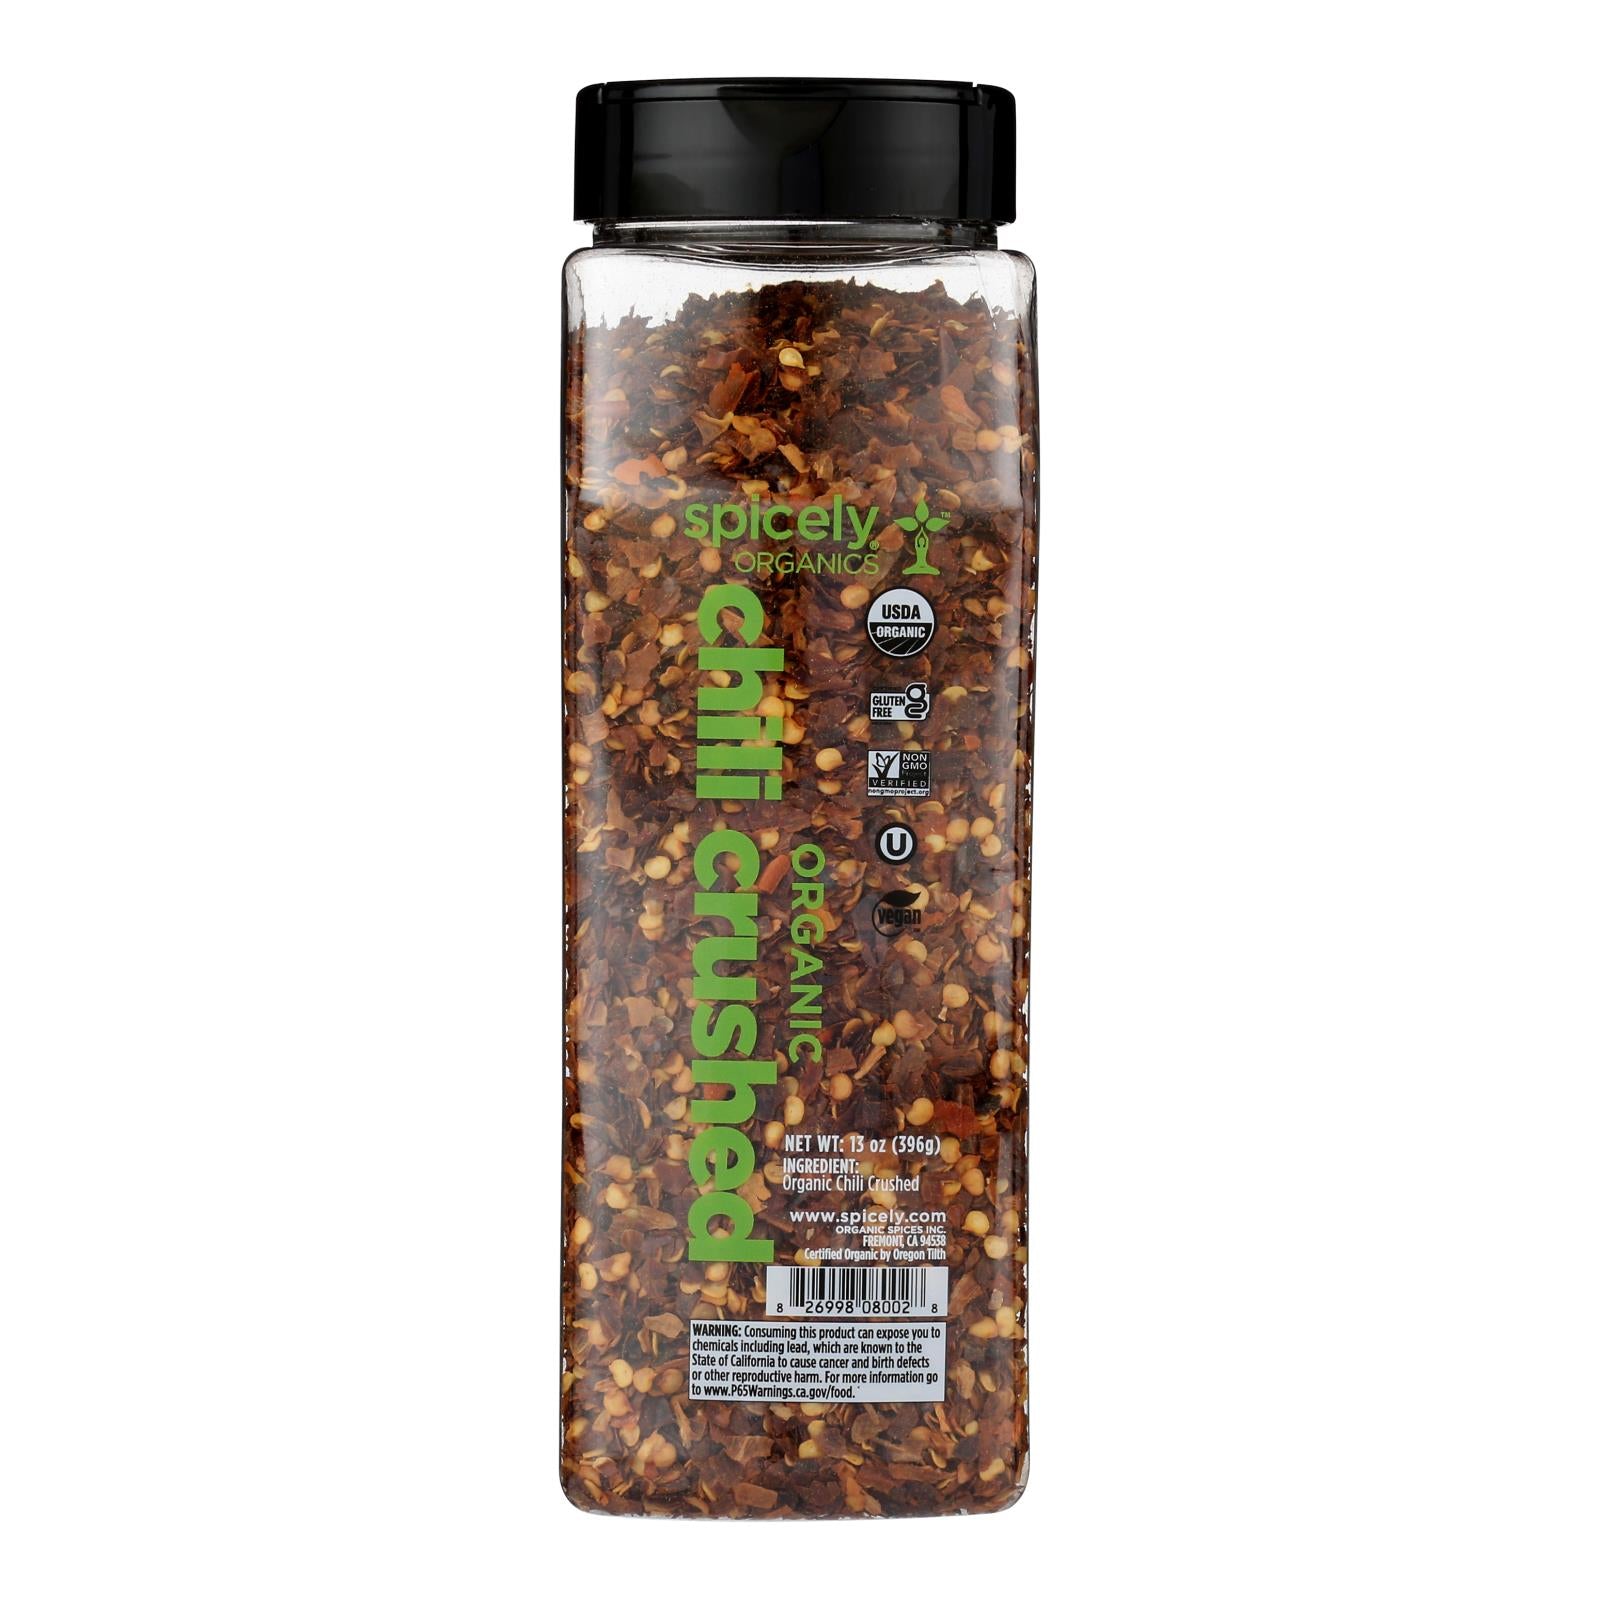 Spicely Organics - Chili Organic Crushed - Case of 2-13 Ounces